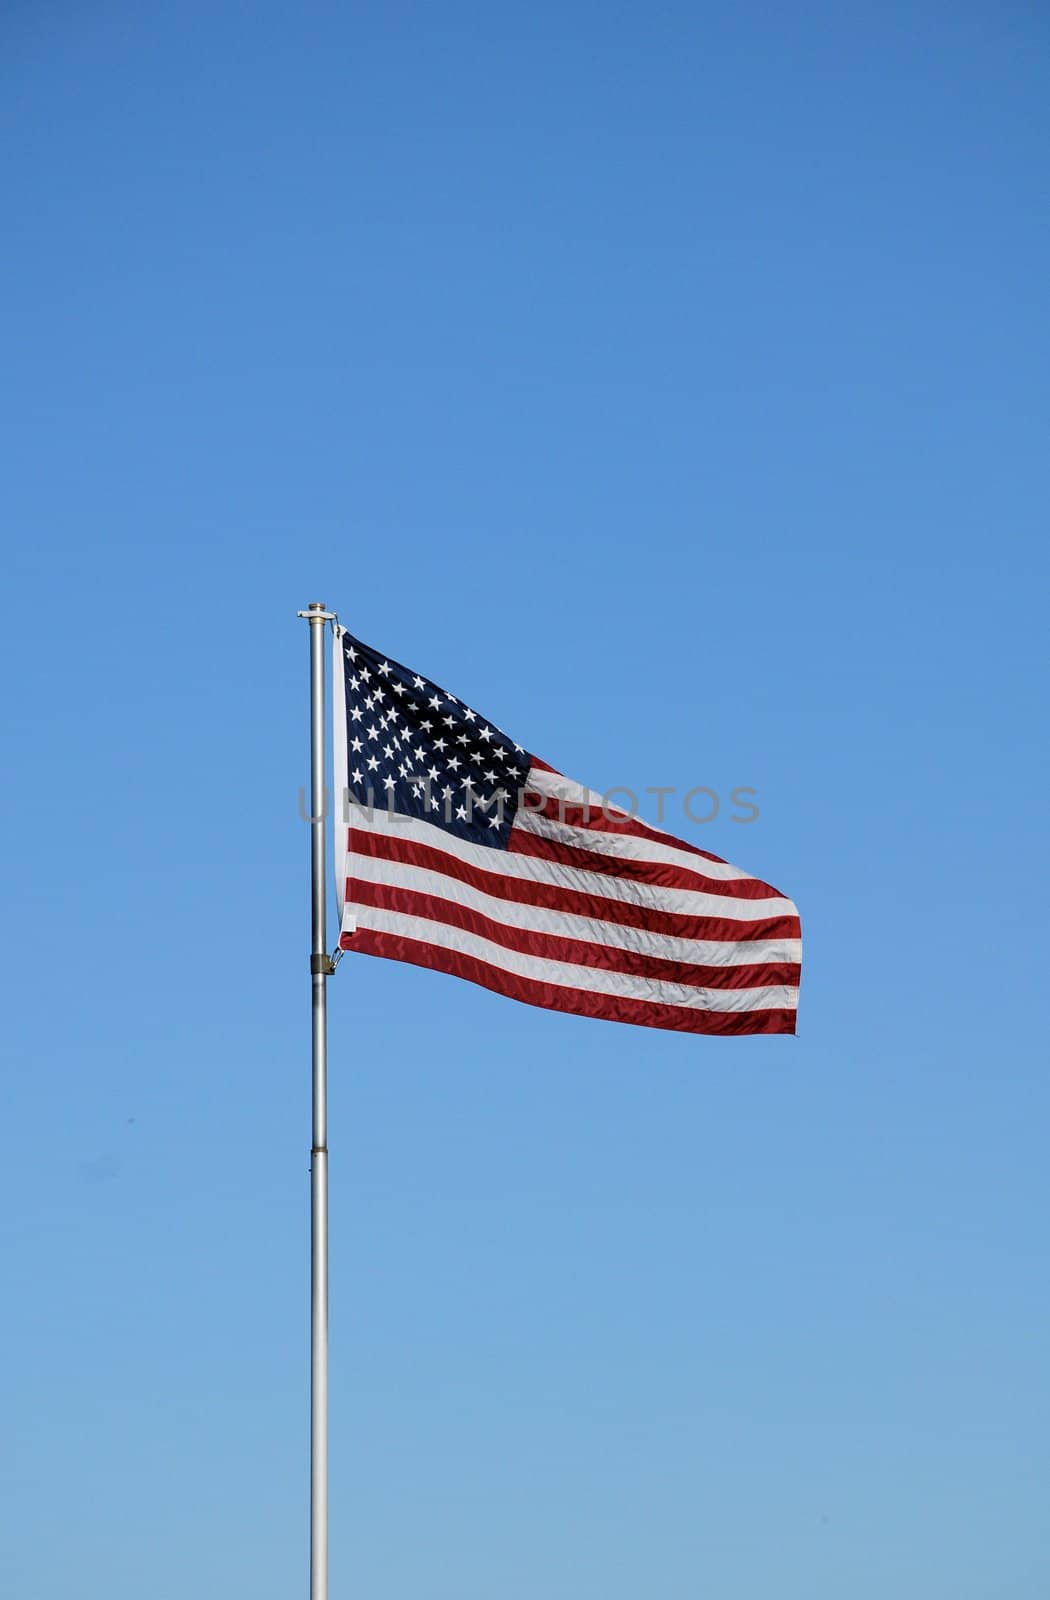 An American flag blowing in the wind